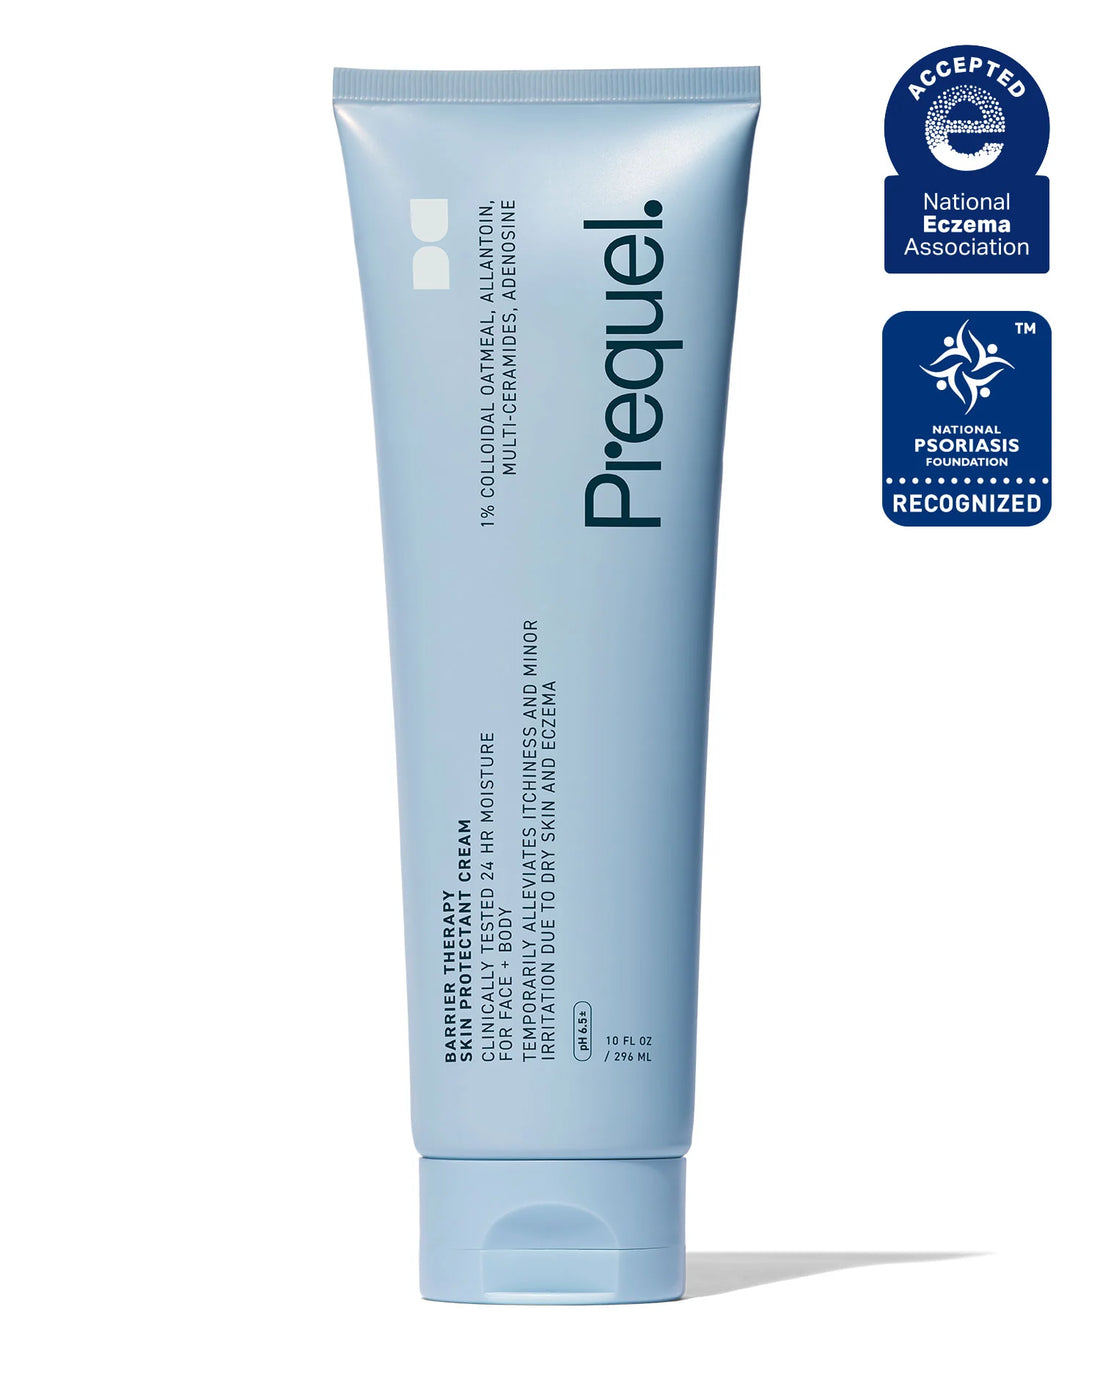 Prequel Barrier Therapy Skin Protectant Cream